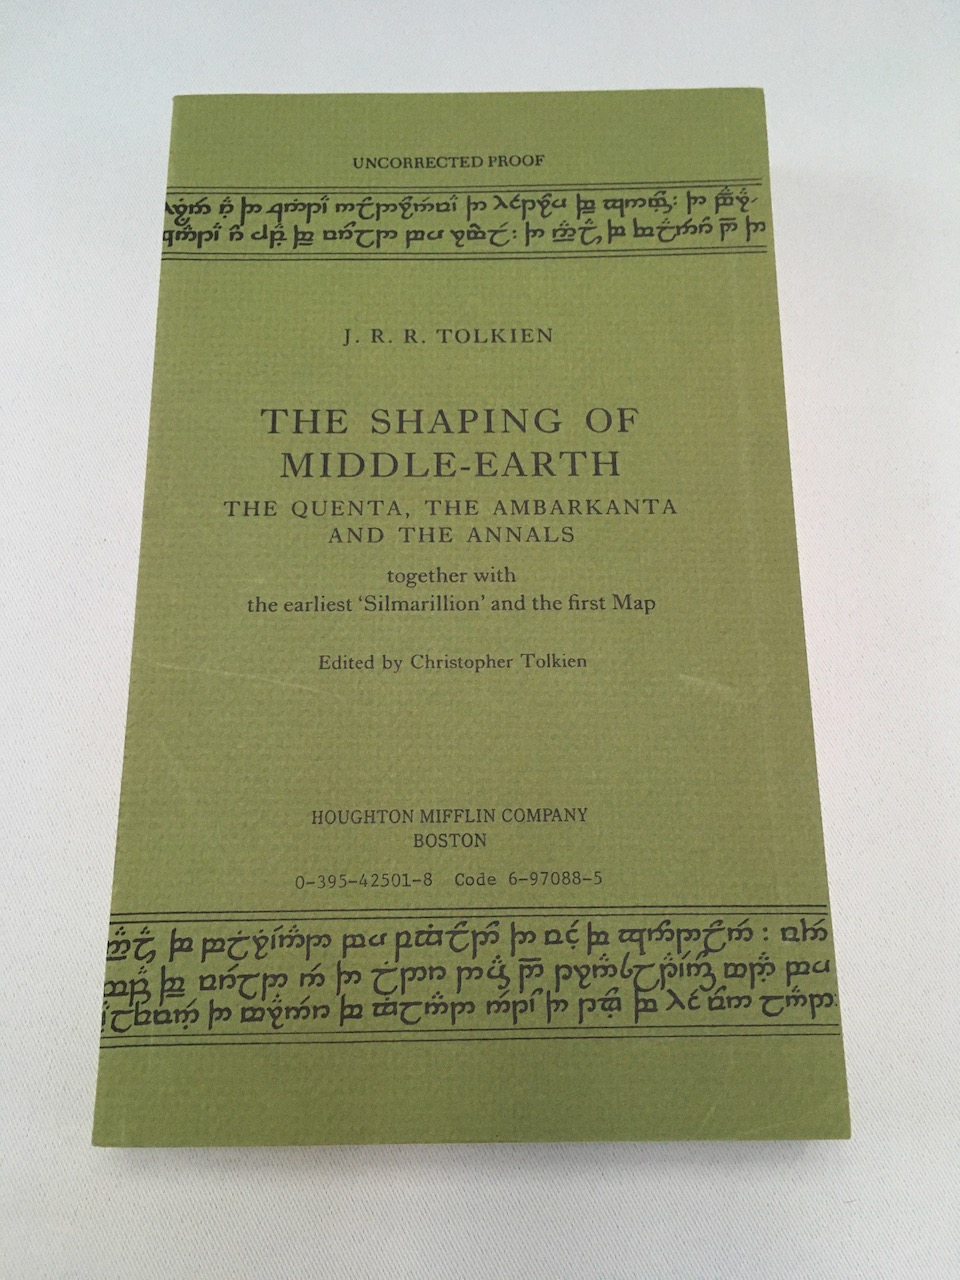 Advance Uncorrected Proof of The Shaping of Middle-earth - The History of Middle-Earth, Volume 4